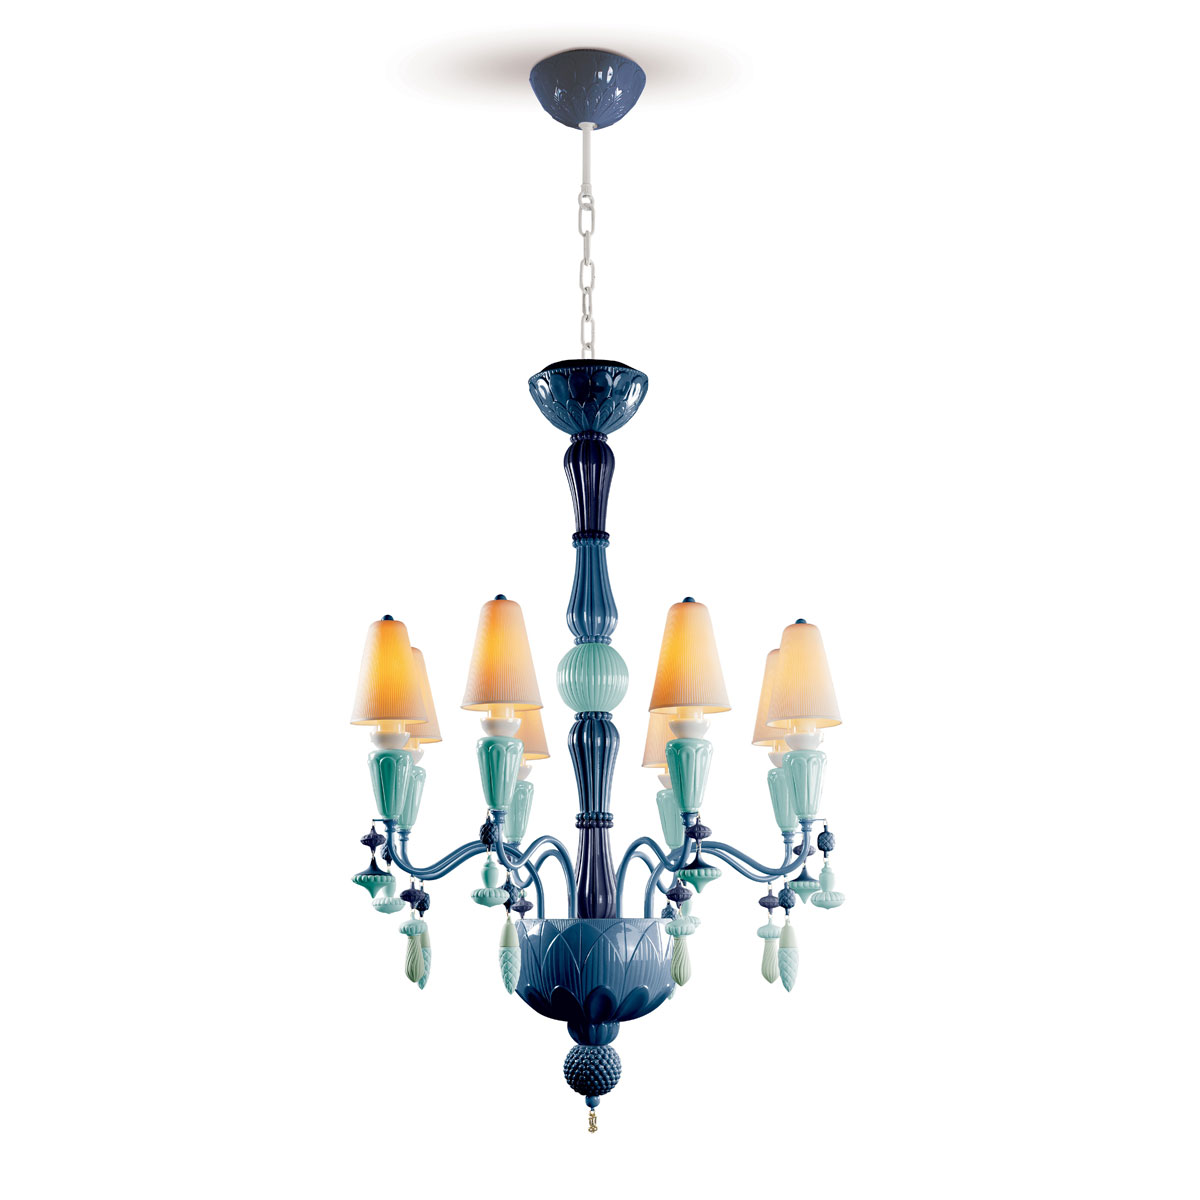 Lladro Classic Lighting, Ivy And Seed 8 Lights Chandelier. Ocean